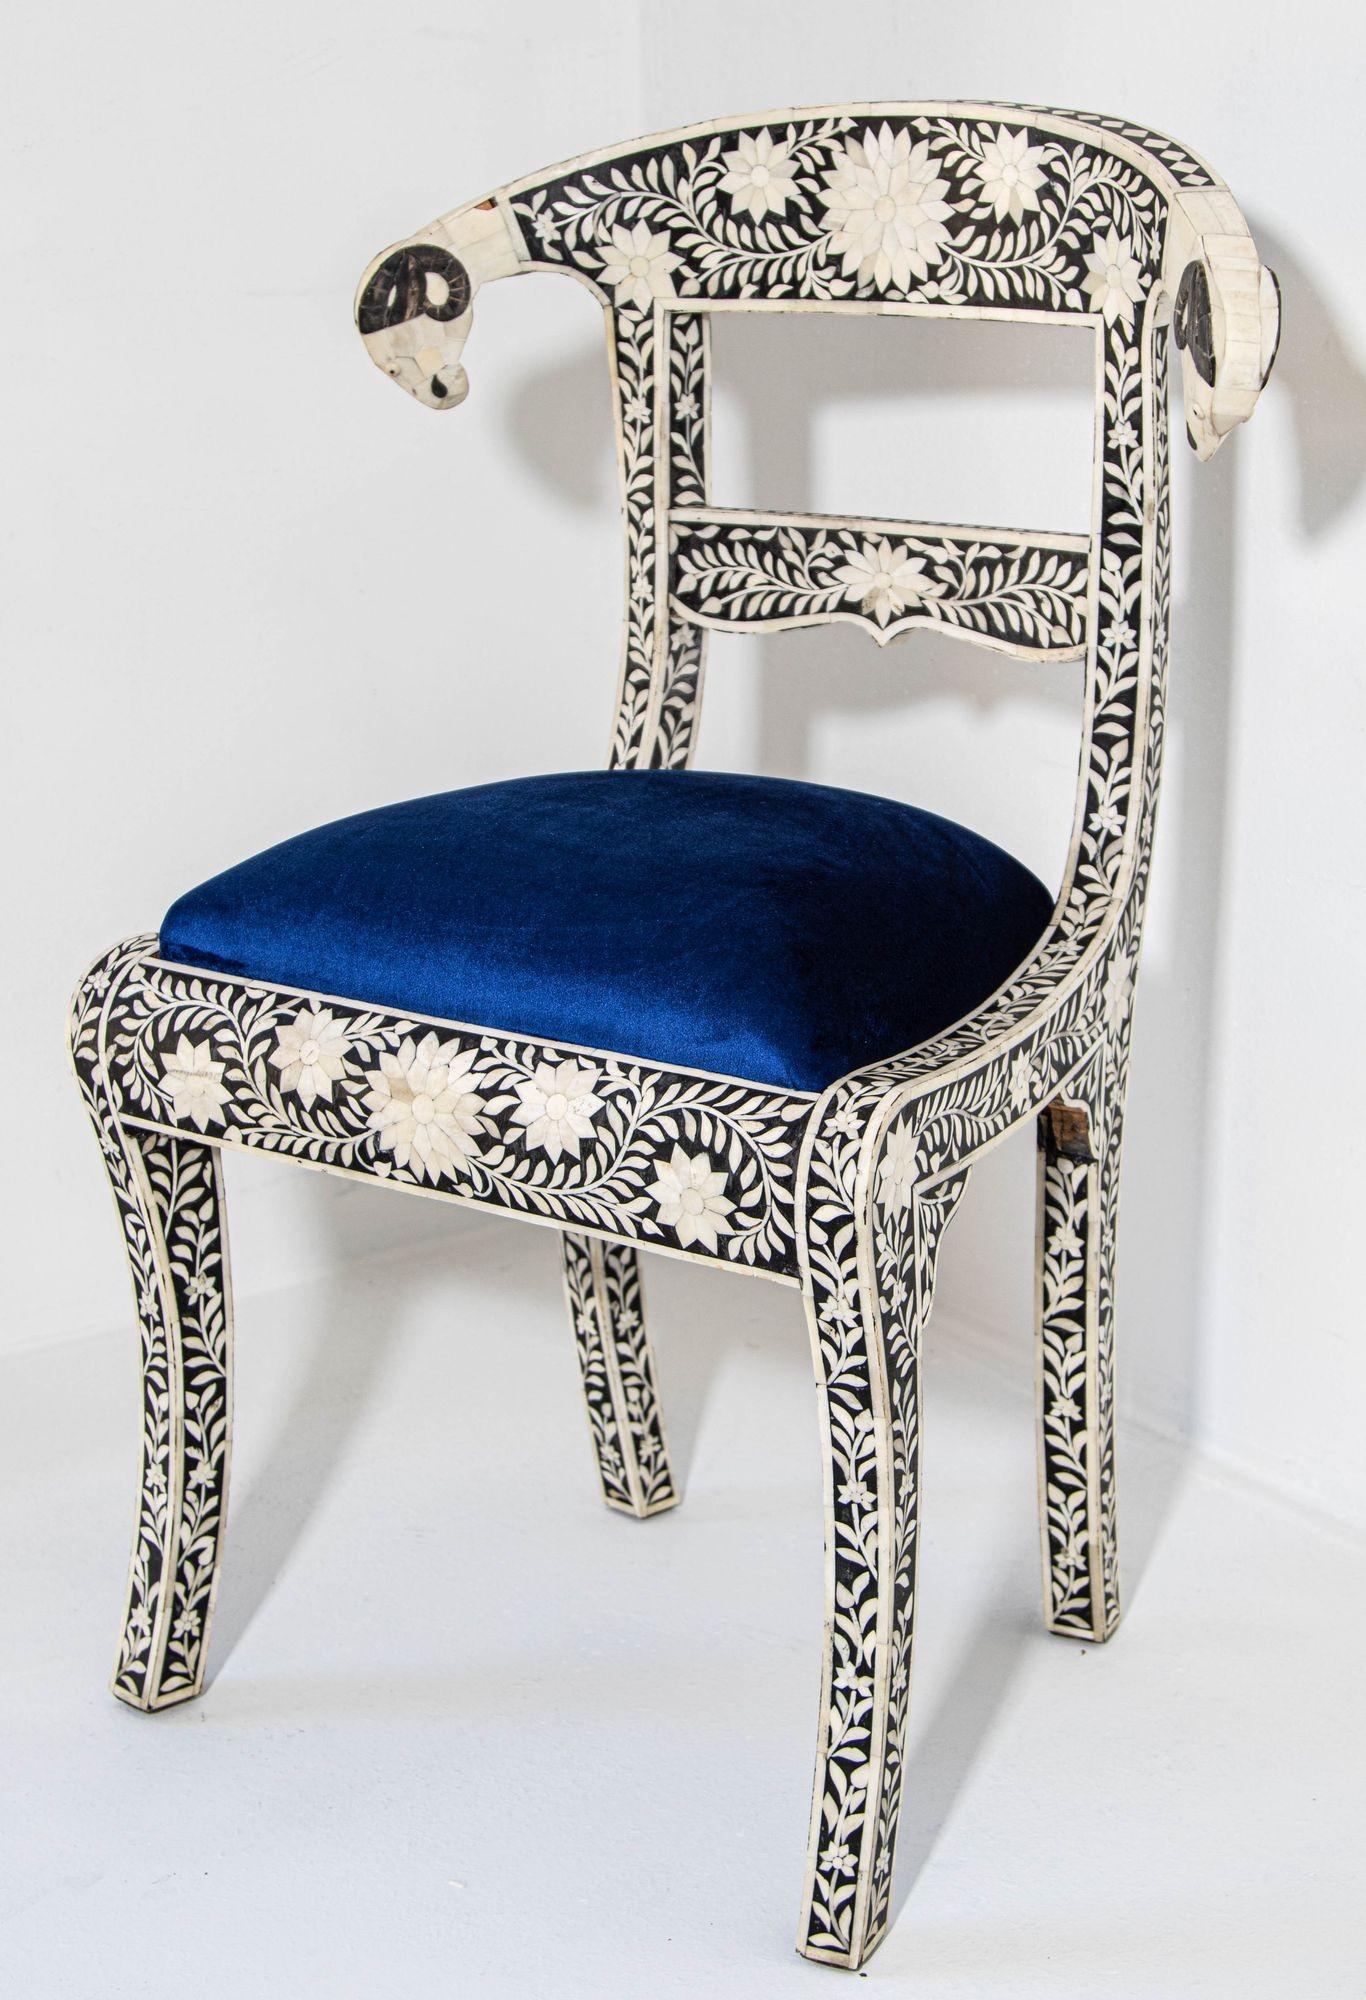 Antique Anglo-Indian Side Chair with Ram's Head Bone Inlaid Royal Blue Seat For Sale 11